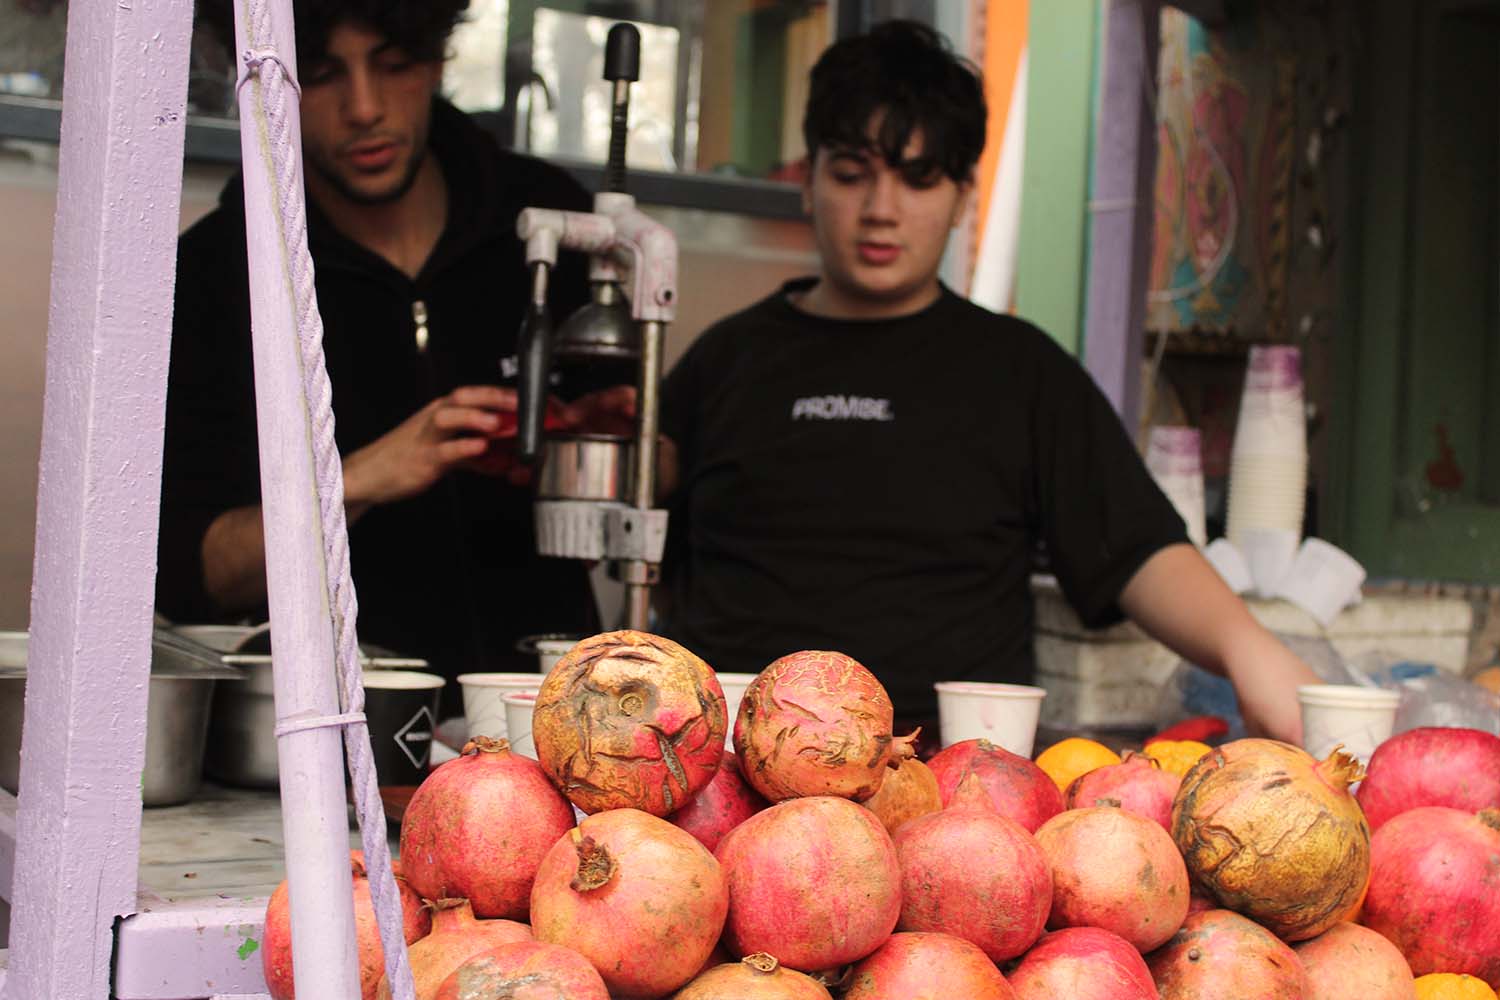 One of many pomegranate juice stands in Istanbul